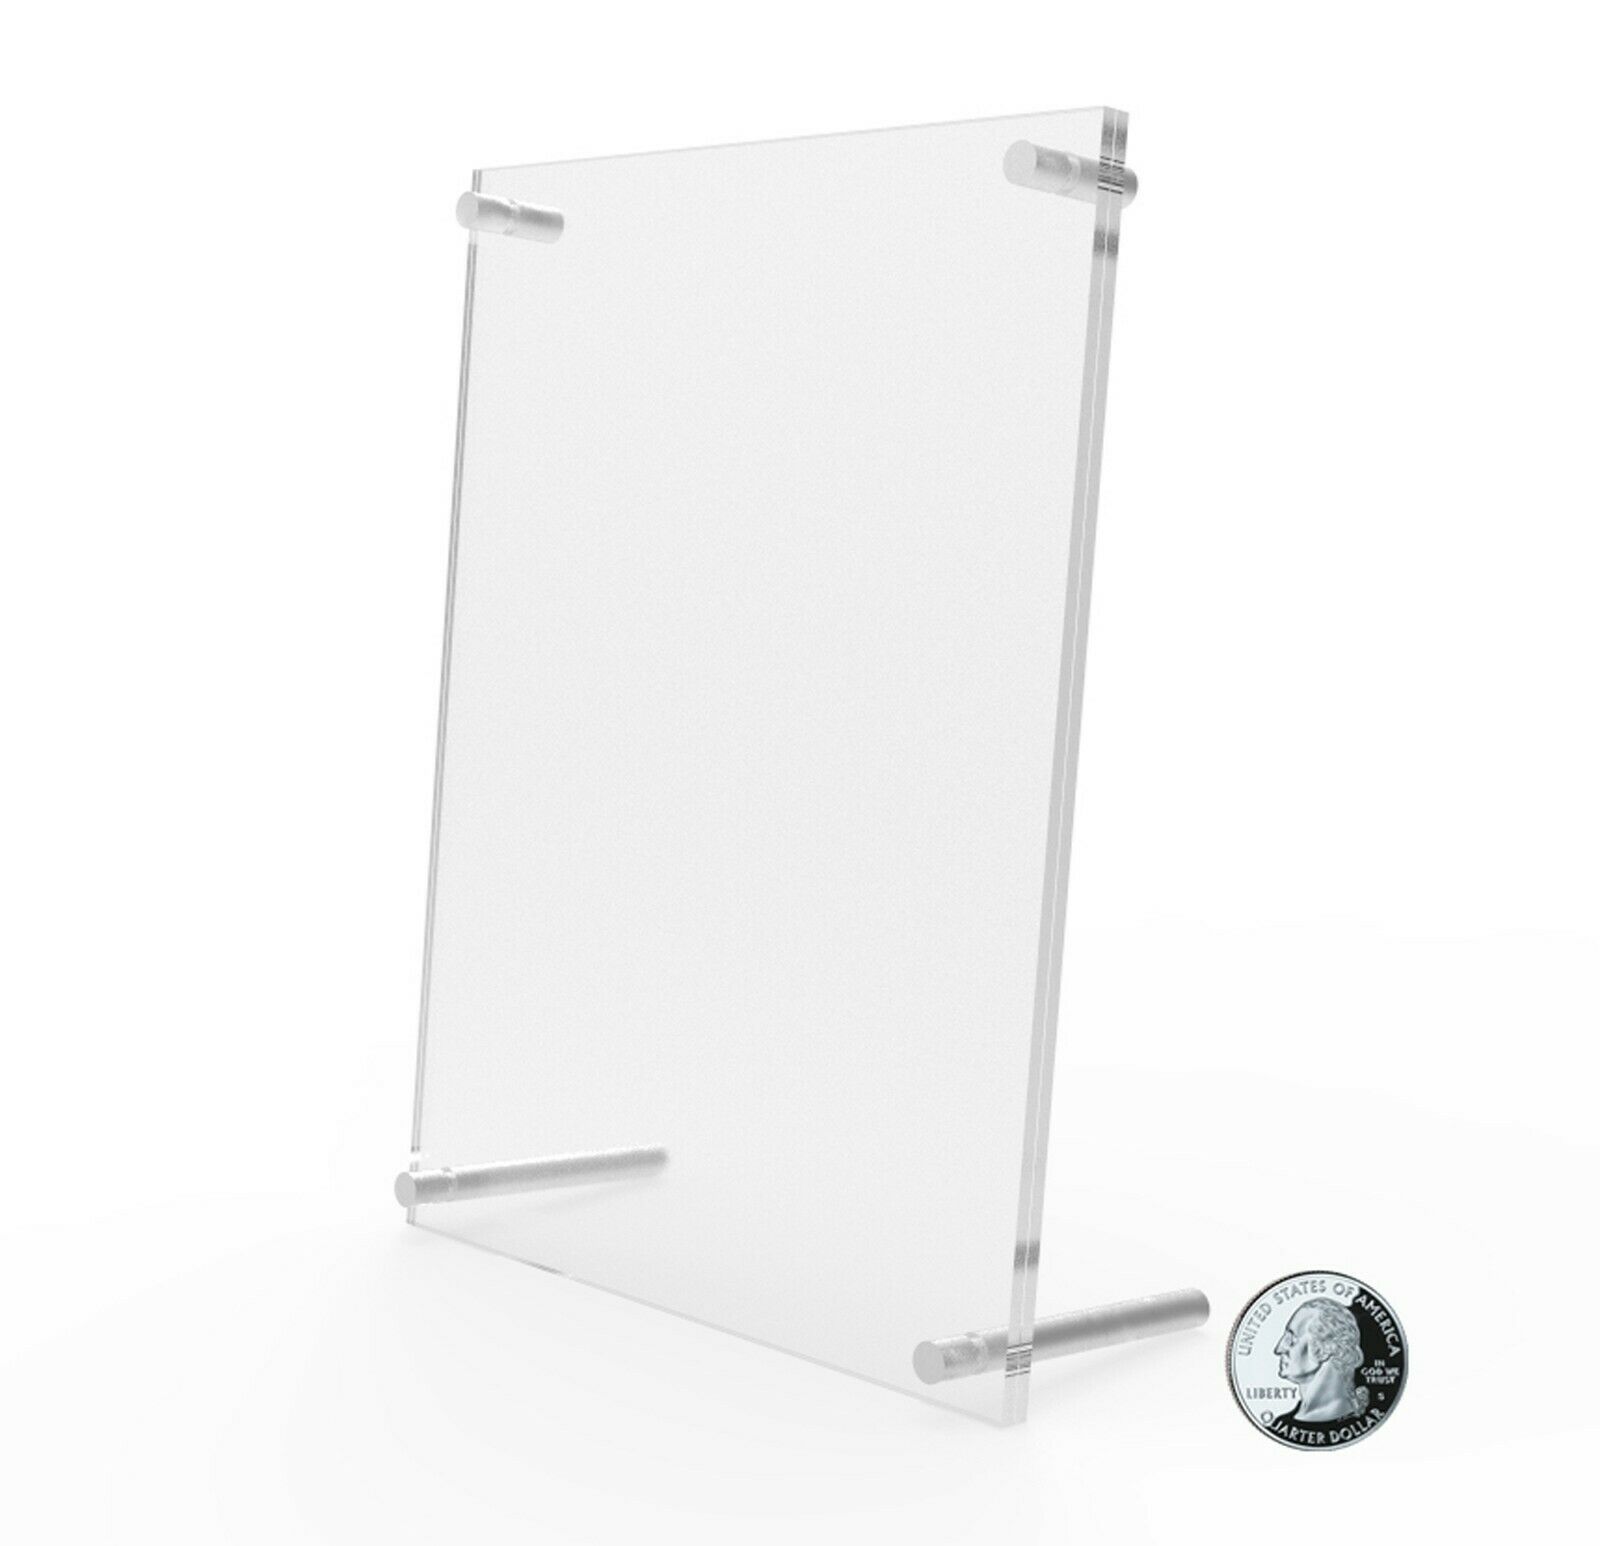 Acrylic Sign Holder Standoff Hardware Picture Frame Countertop Clear Sign Stand